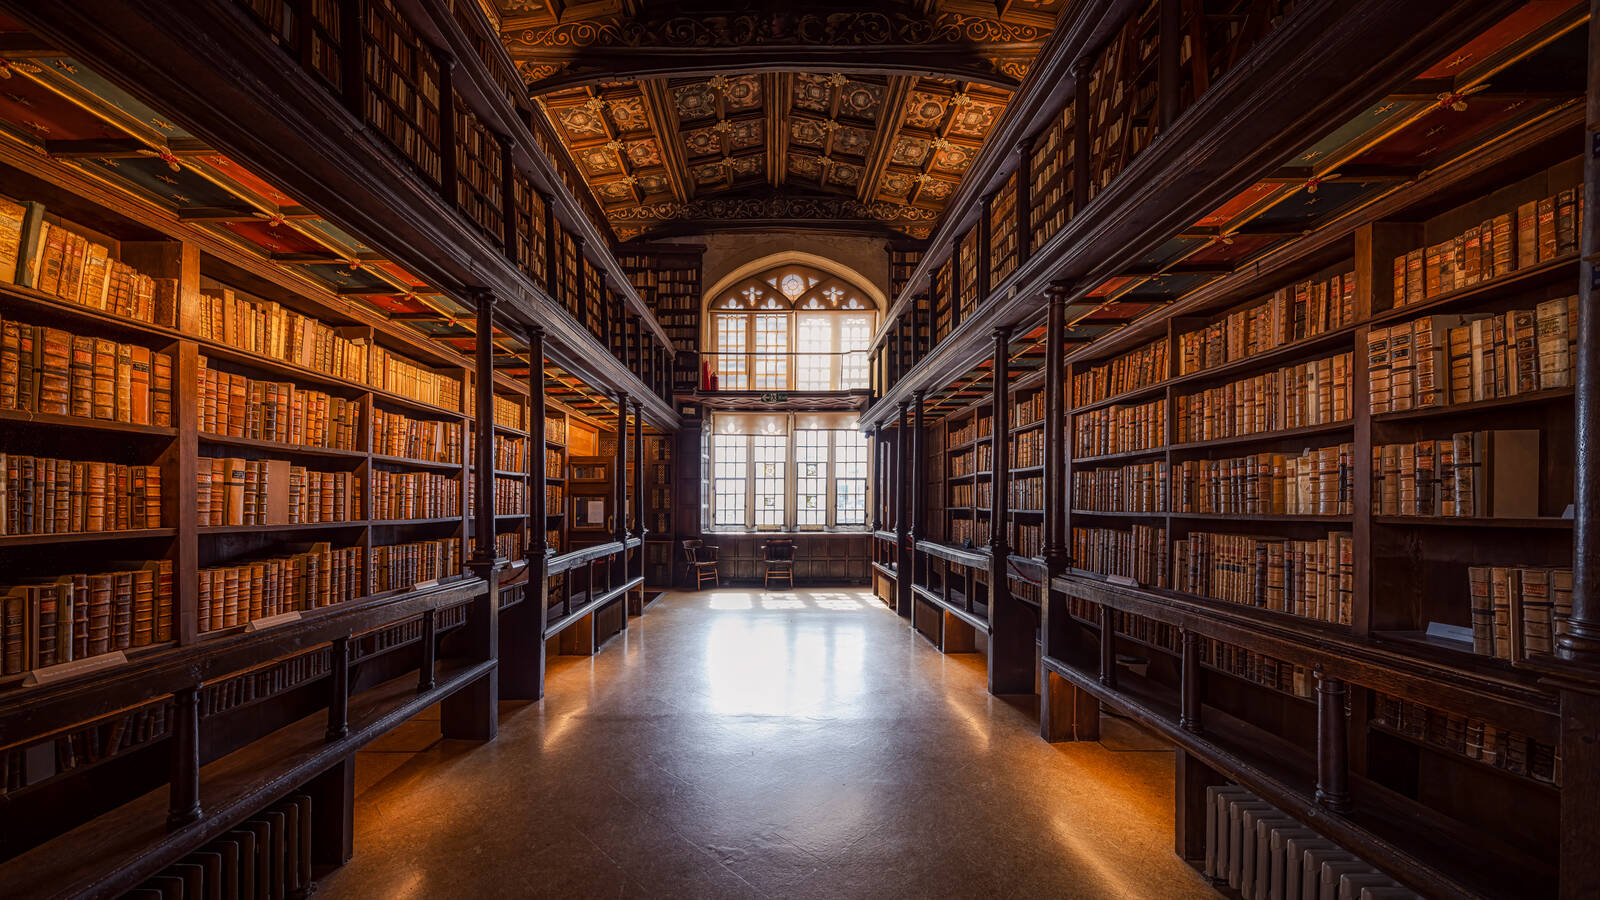 Image of Bodleian Library by Jakub Bors